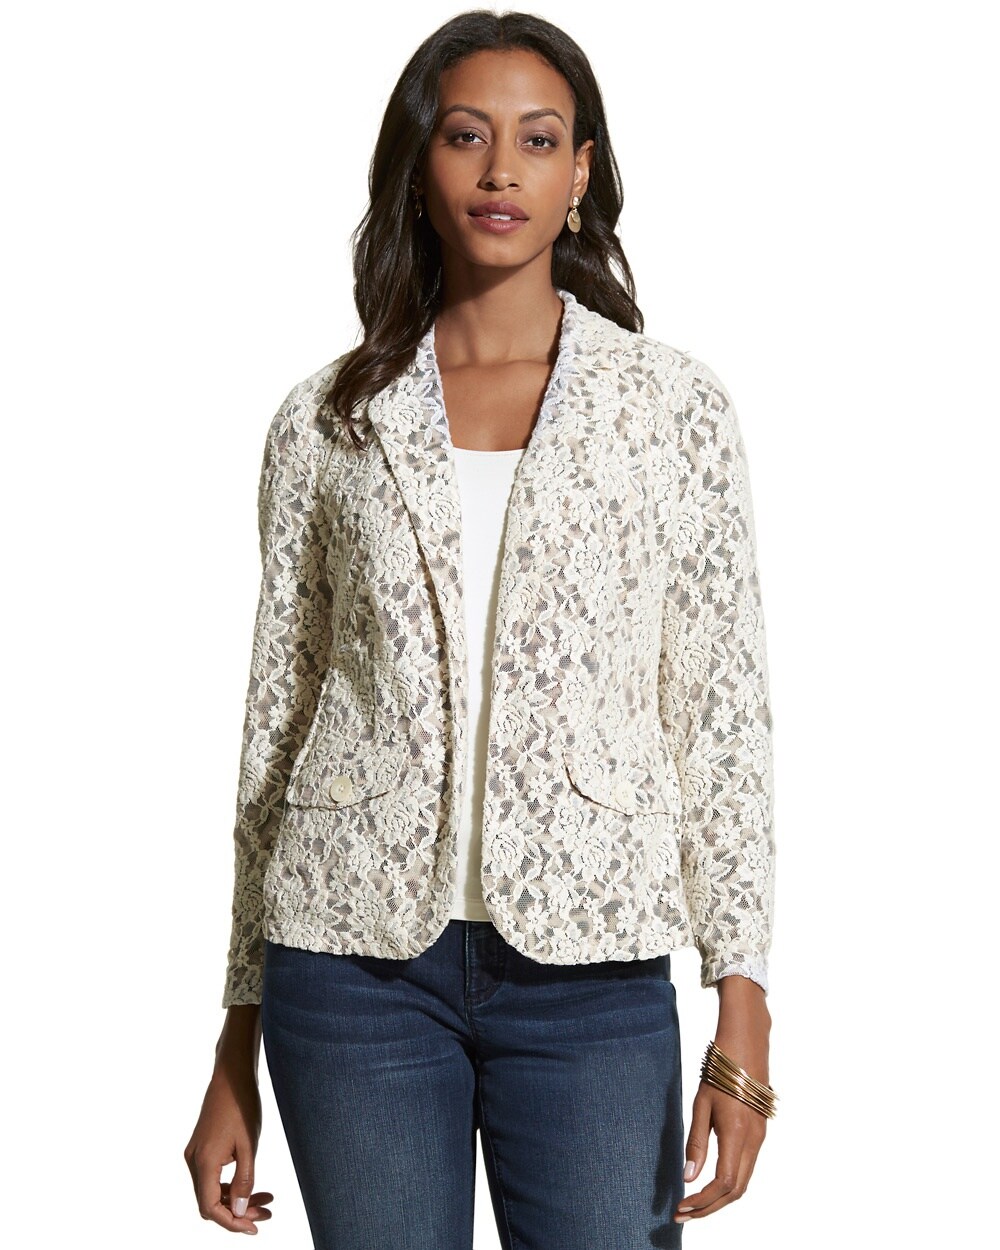 Lace and Animal-Print Jacket - Chico's